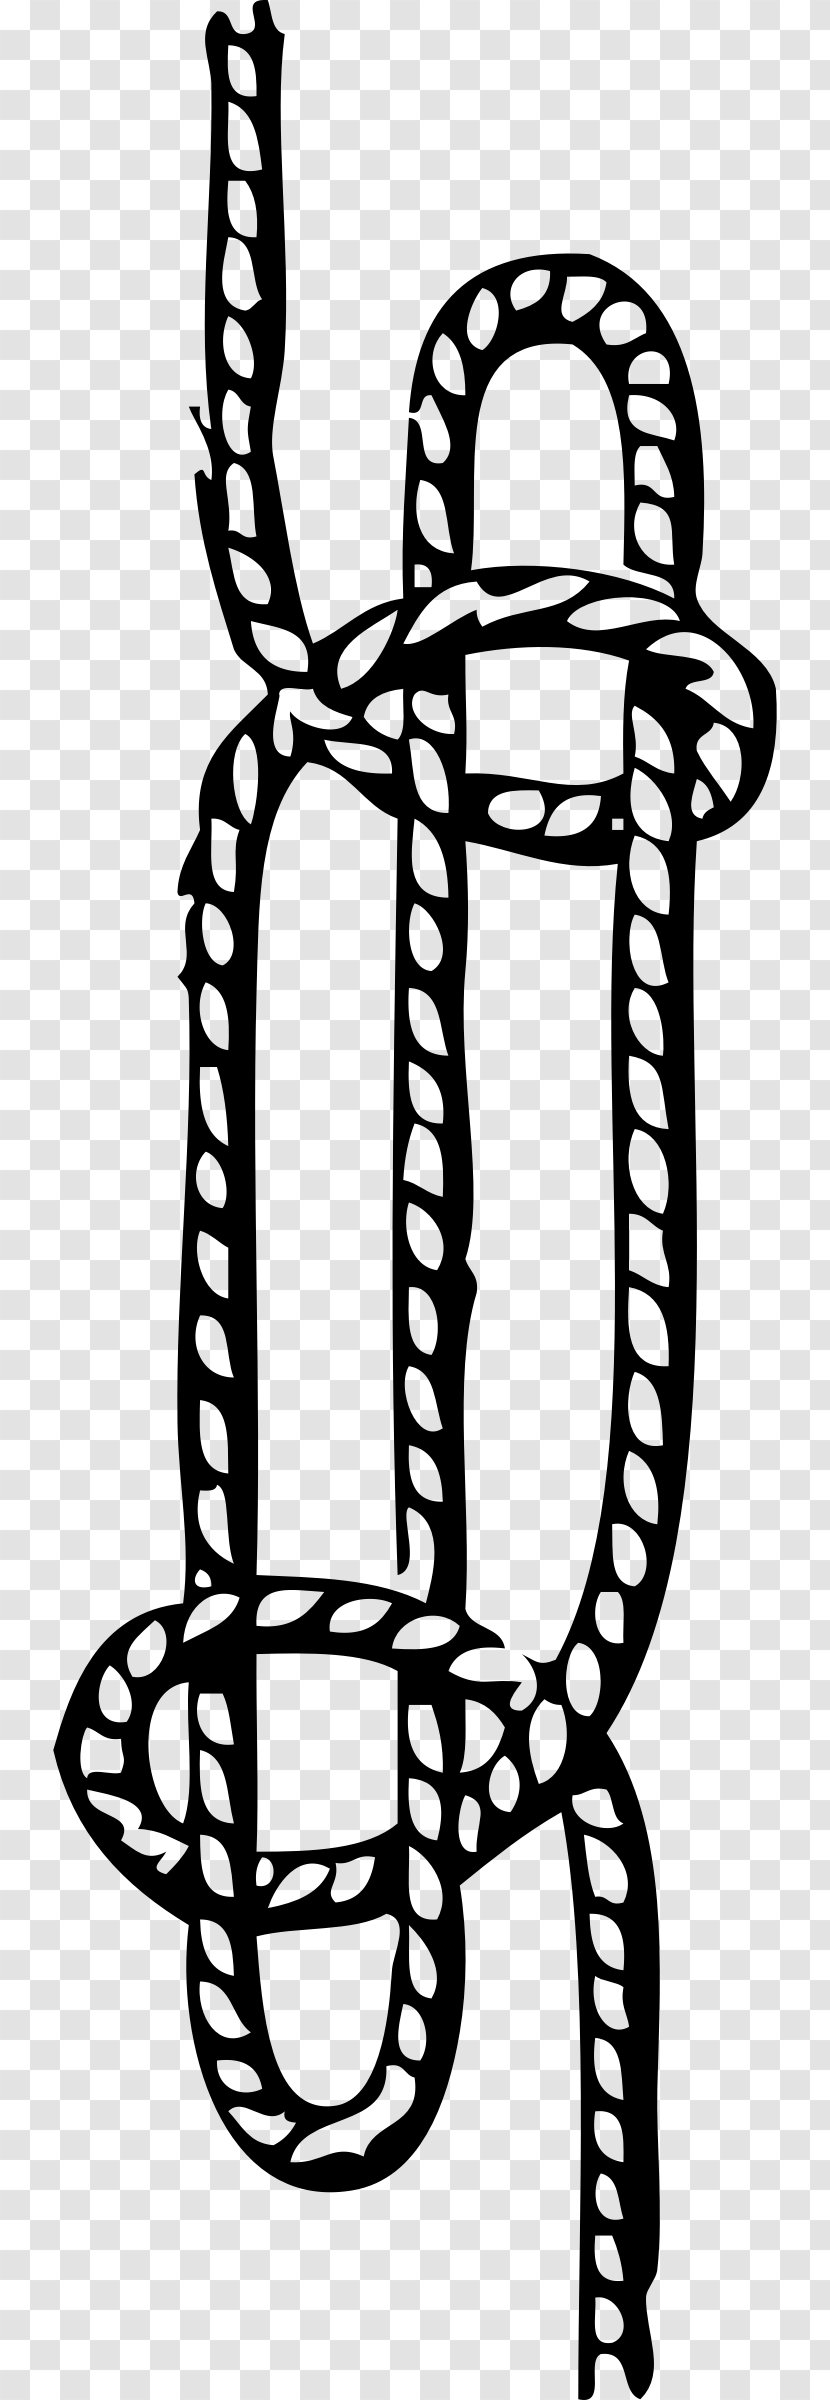 Knot Bowline On A Bight - Sheepshank - Rope Transparent PNG